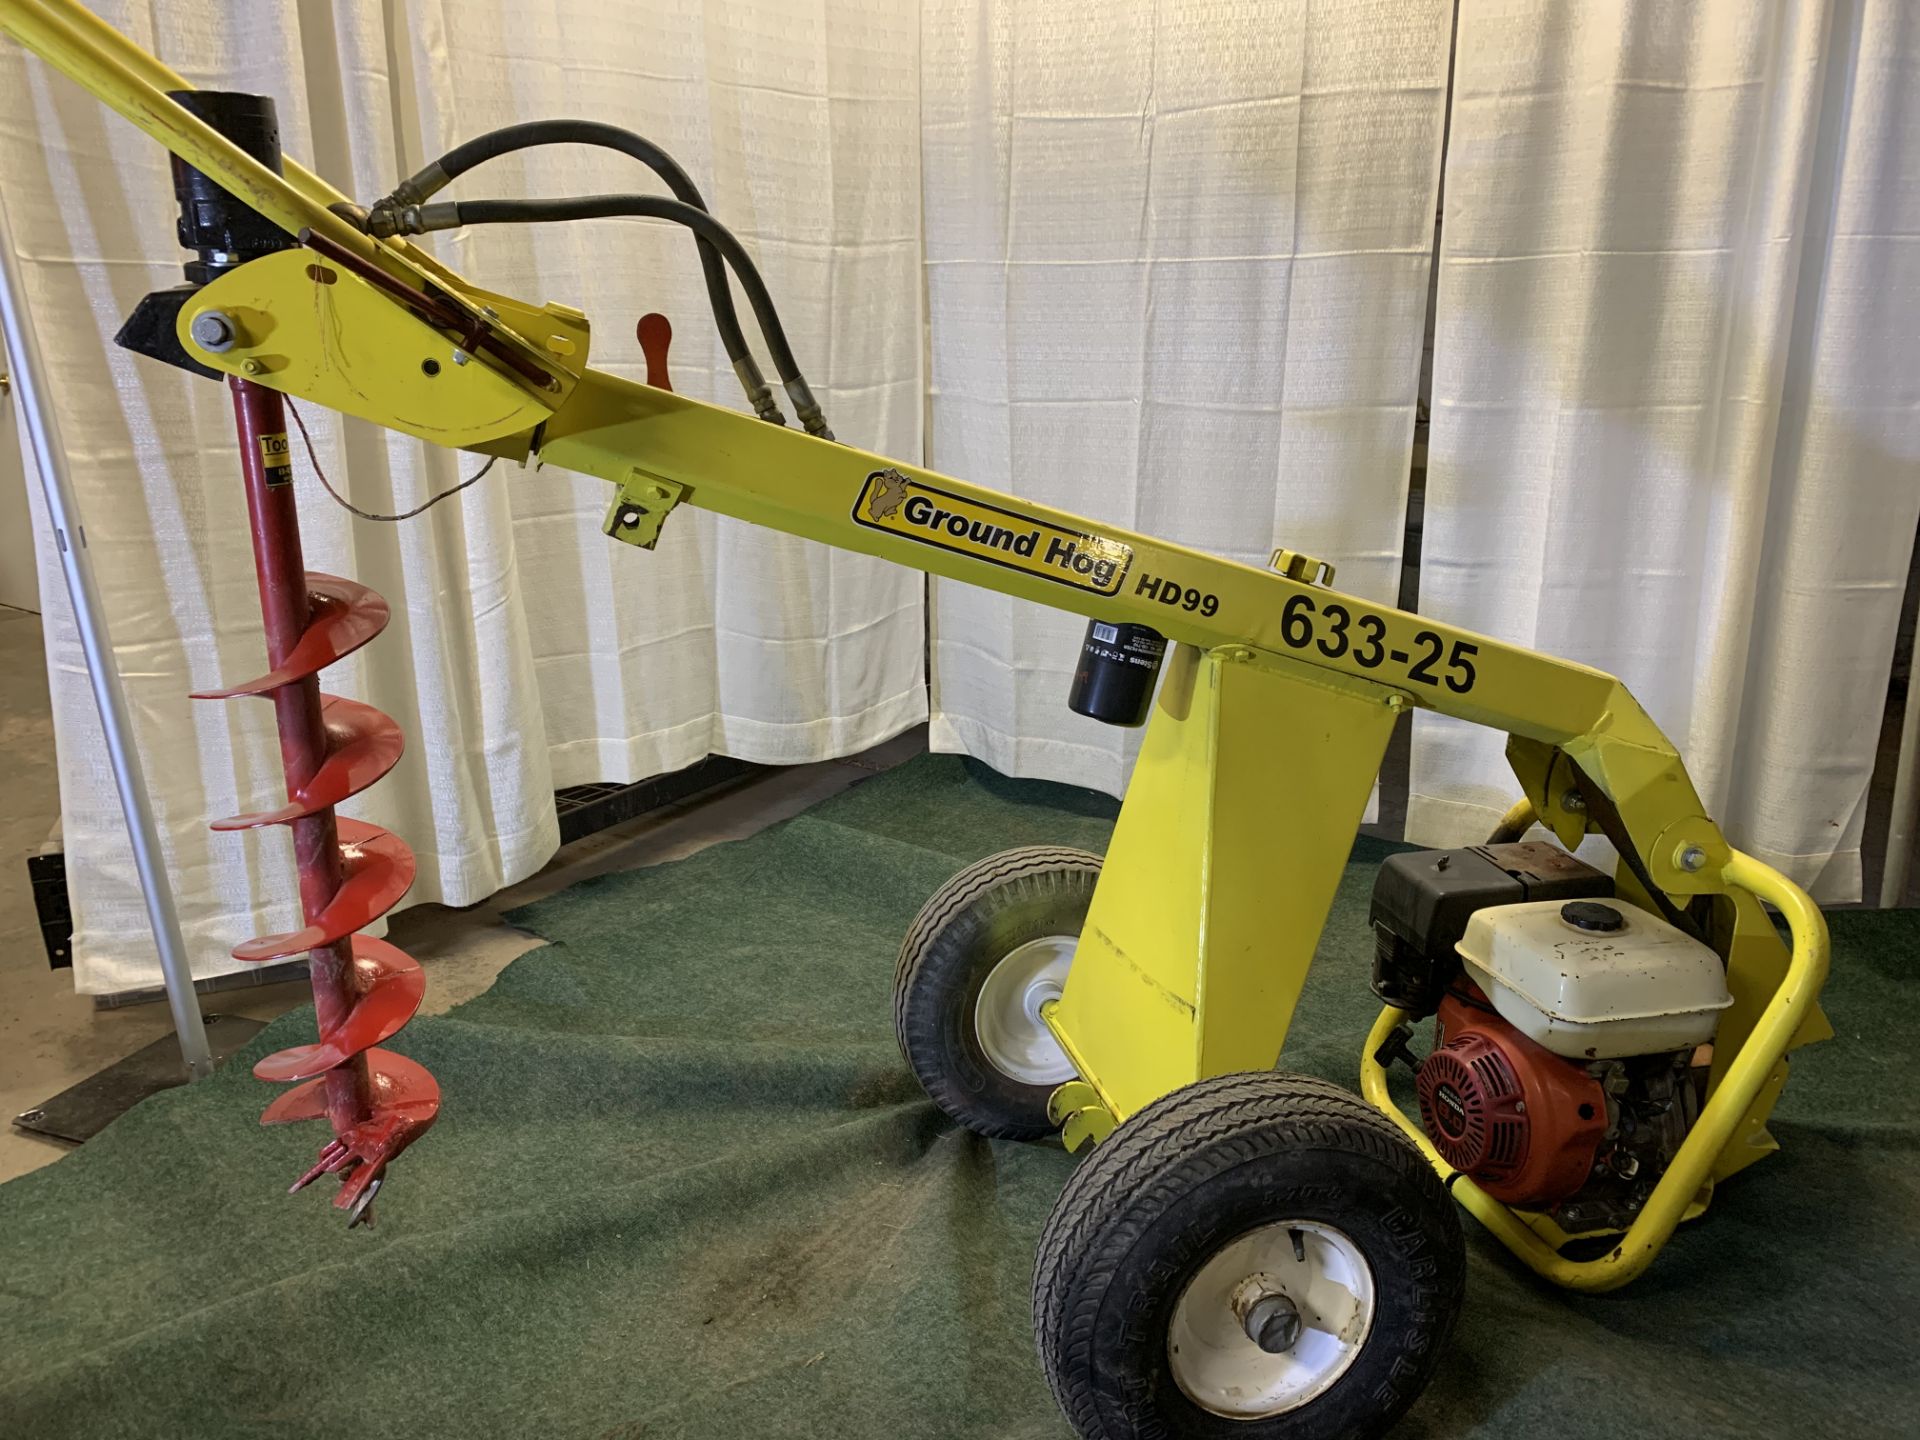 Ground Hog HD99 hydraulic post digger with auger, s/n 402107